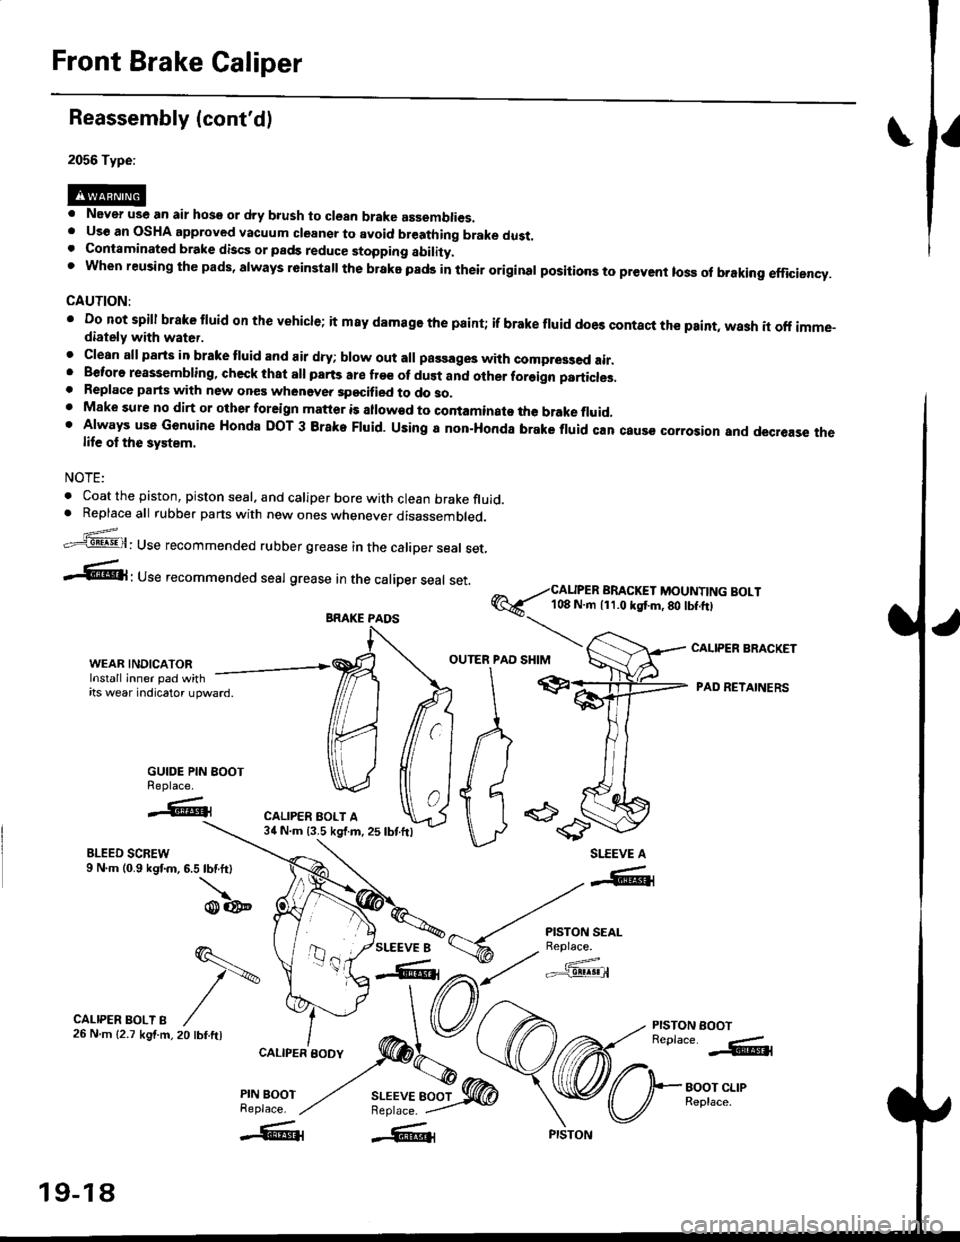 HONDA CIVIC 1997 6.G User Guide Front Brake Caliper
Reassembly (contd)
2056 Type:
. Never use an air hose or dry b.ush to clean brake assemblies.. Uso an OSHA approved vacuum cleansr to avoid breathing brake dust.. Contaminated bra